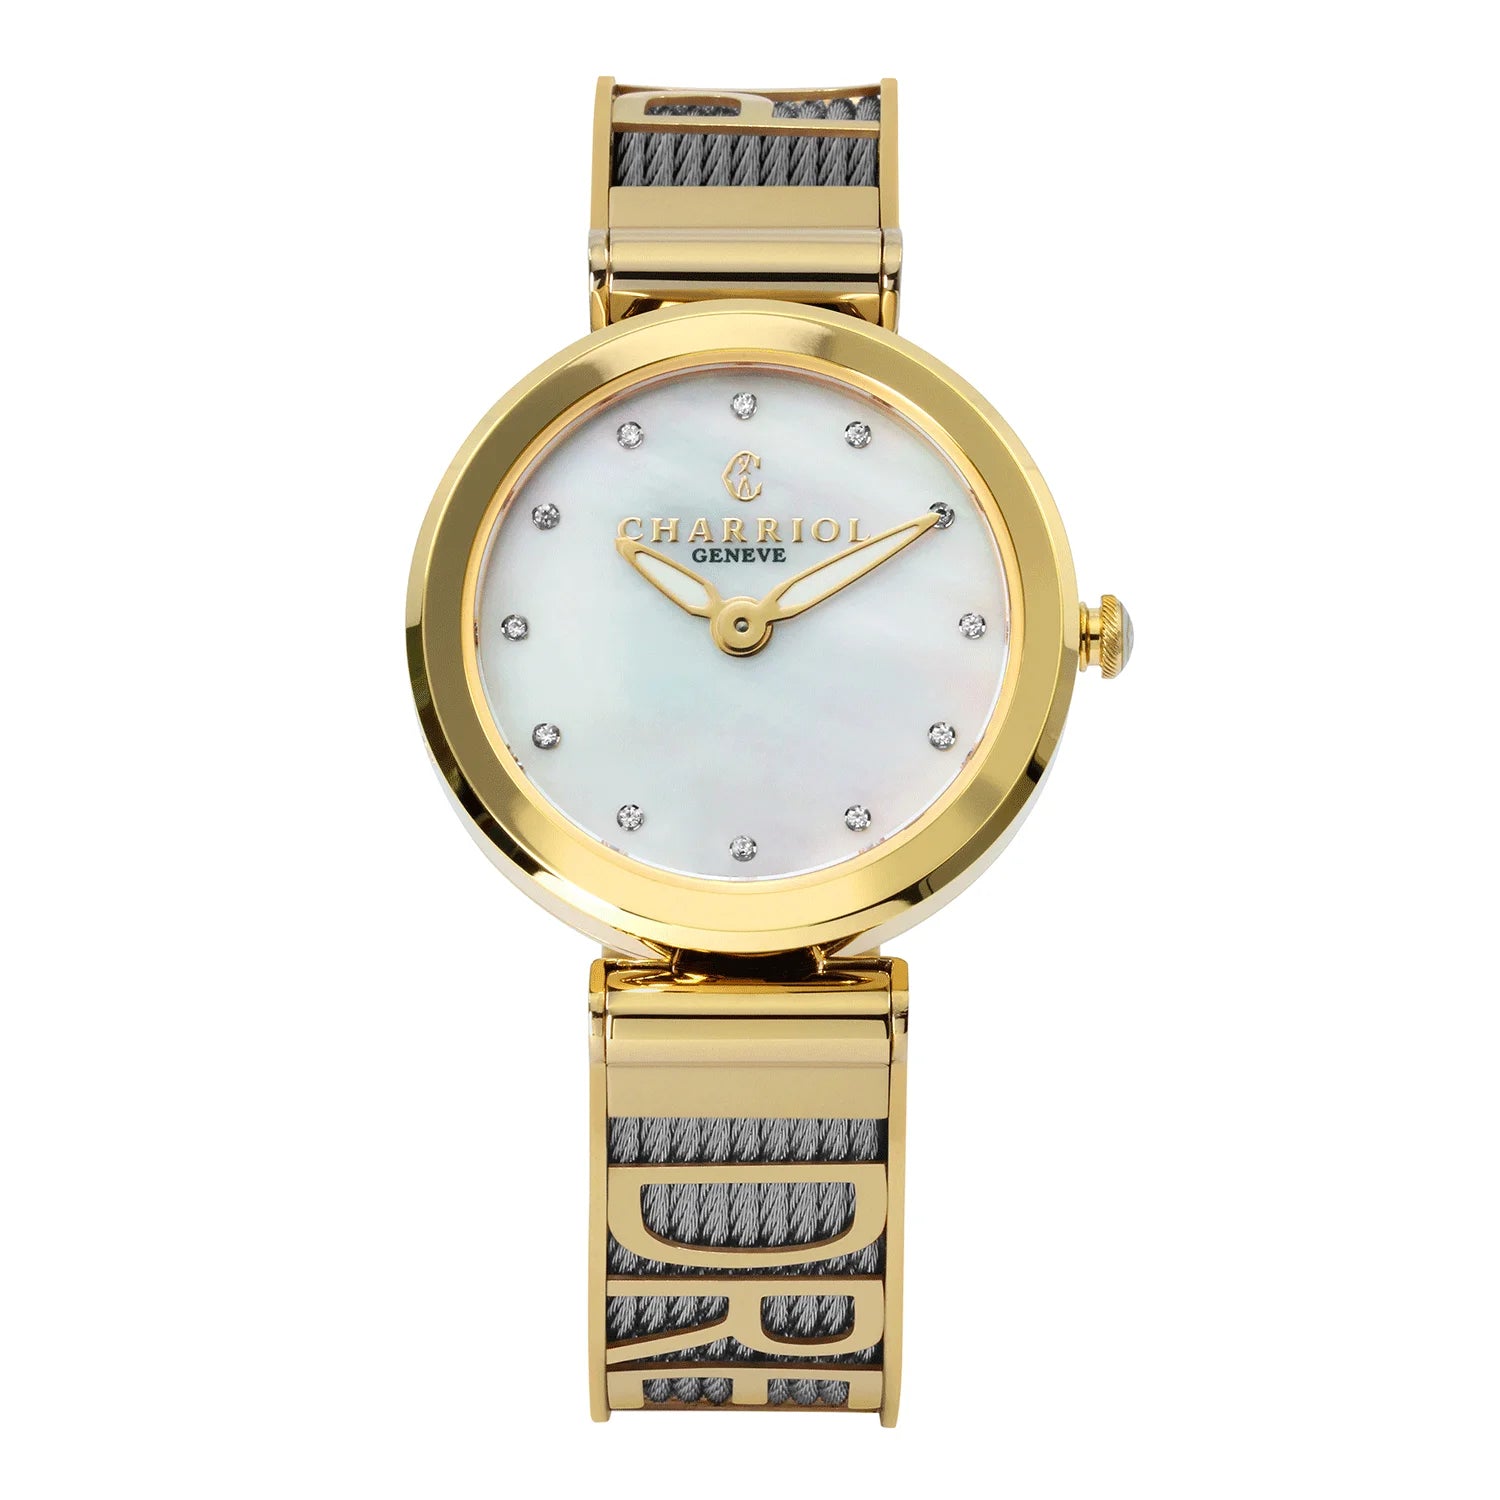 FOREVER YOURS, 32MM, QUARTZ CALIBRE, MOTHER-OF-PEARL WITH 12 DIAMONDS DIAL, YELLOW GOLD PVD BEZEL, STEEL CABLE BRACELET